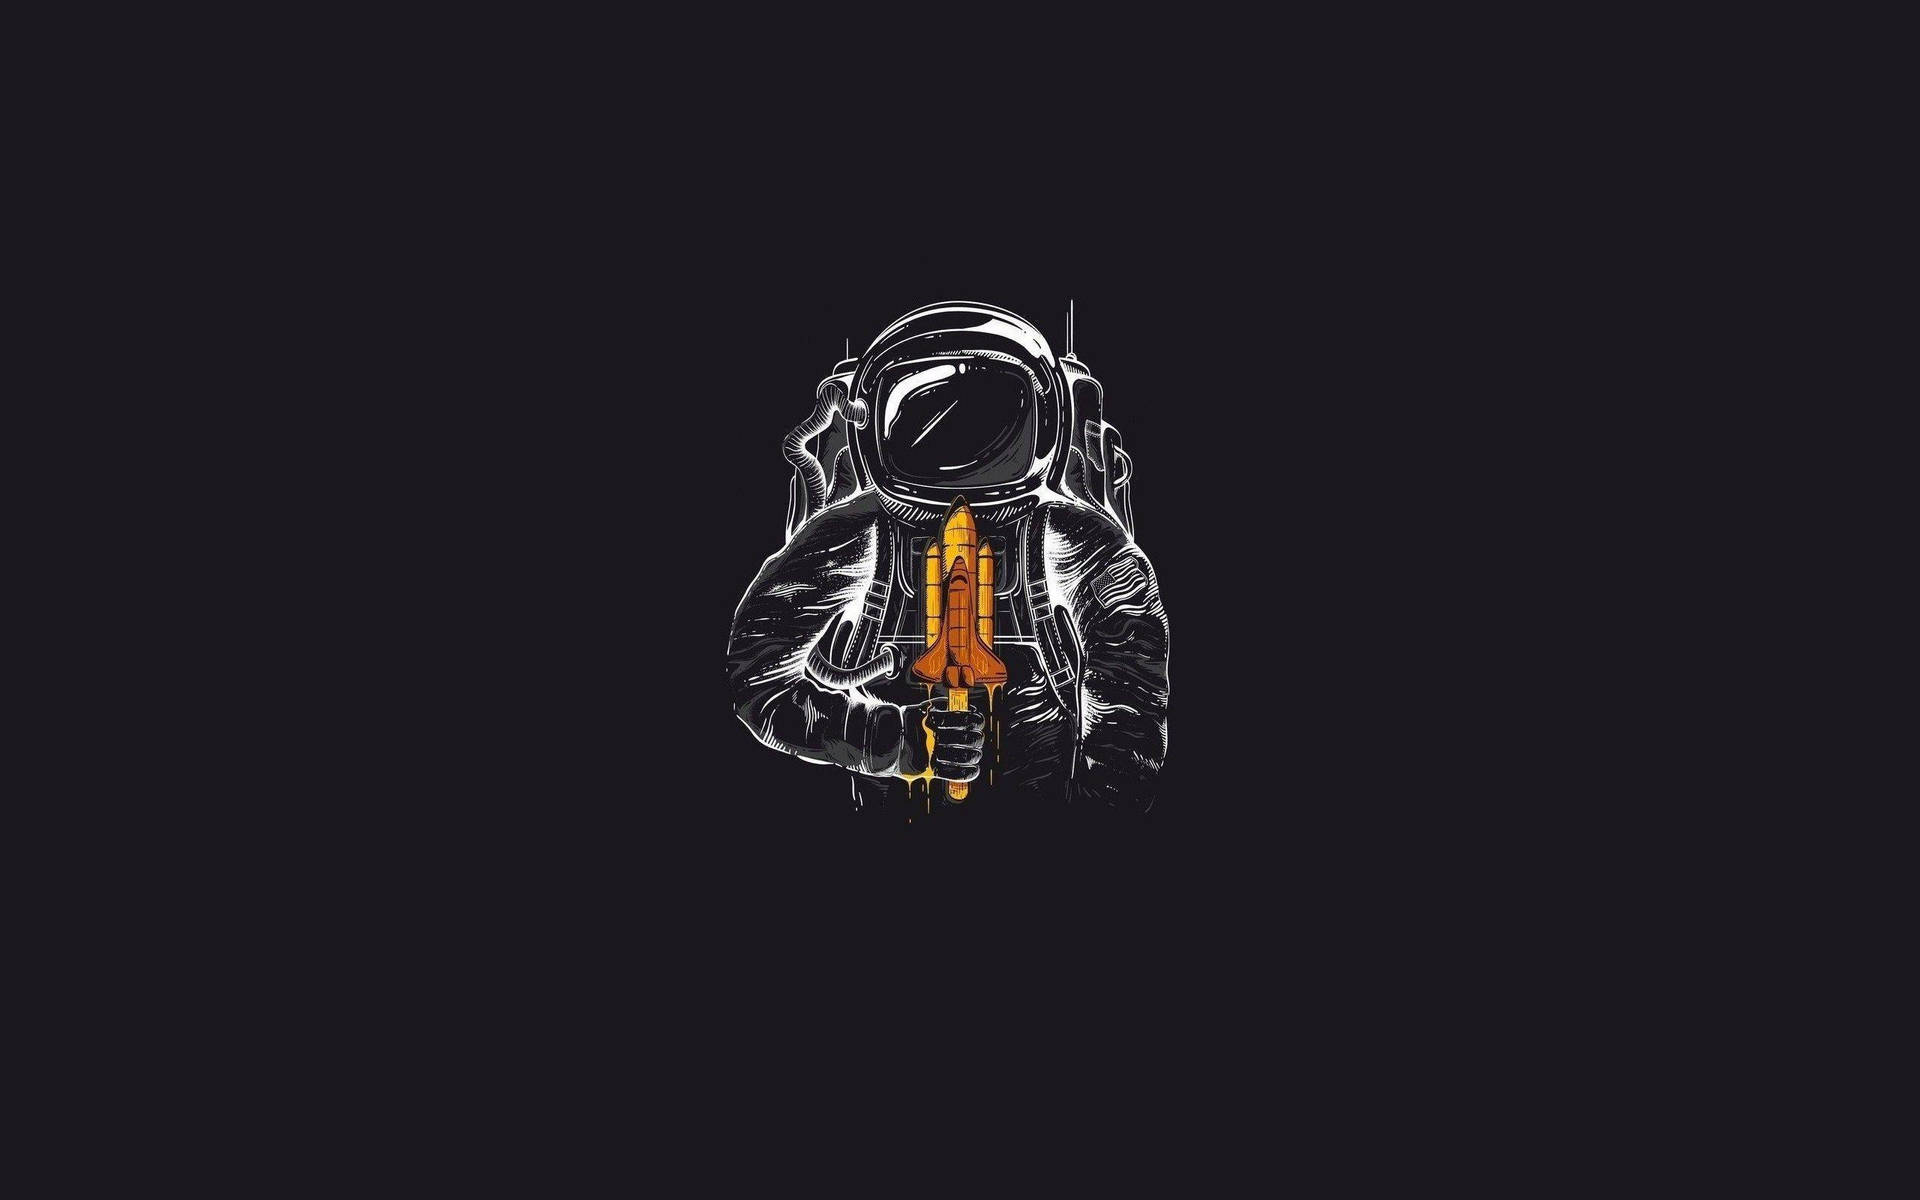 Aesthetic Illustration Of Spaceman